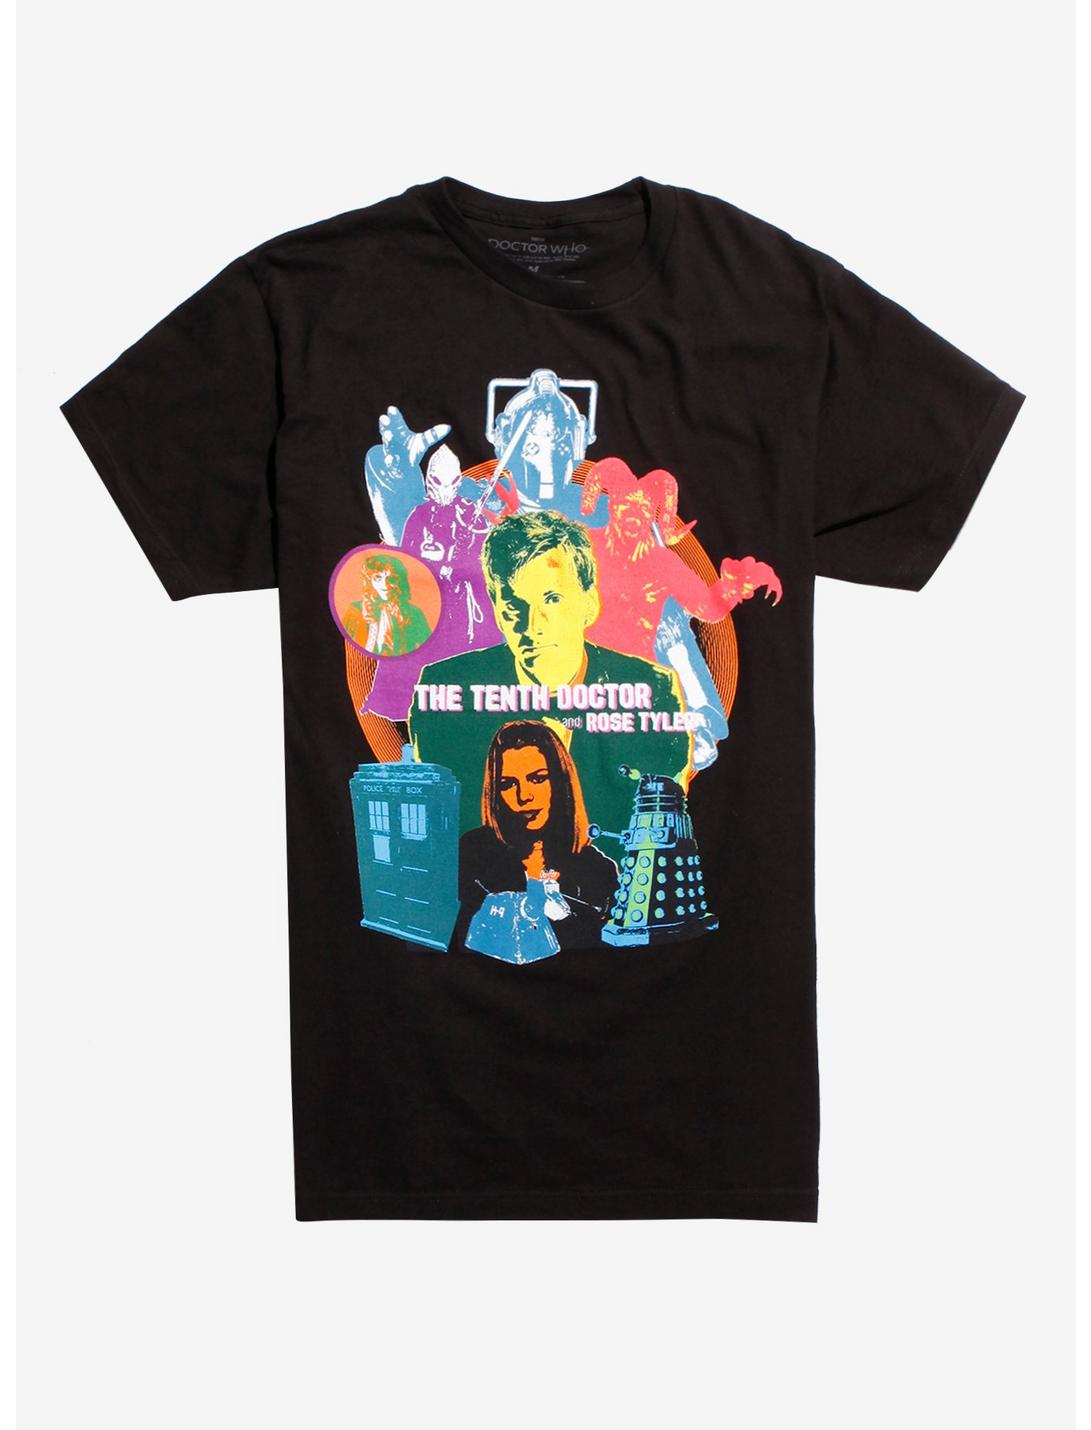 Doctor Who The Tenth Doctor And Rose Tyler T-Shirt, BLACK, hi-res